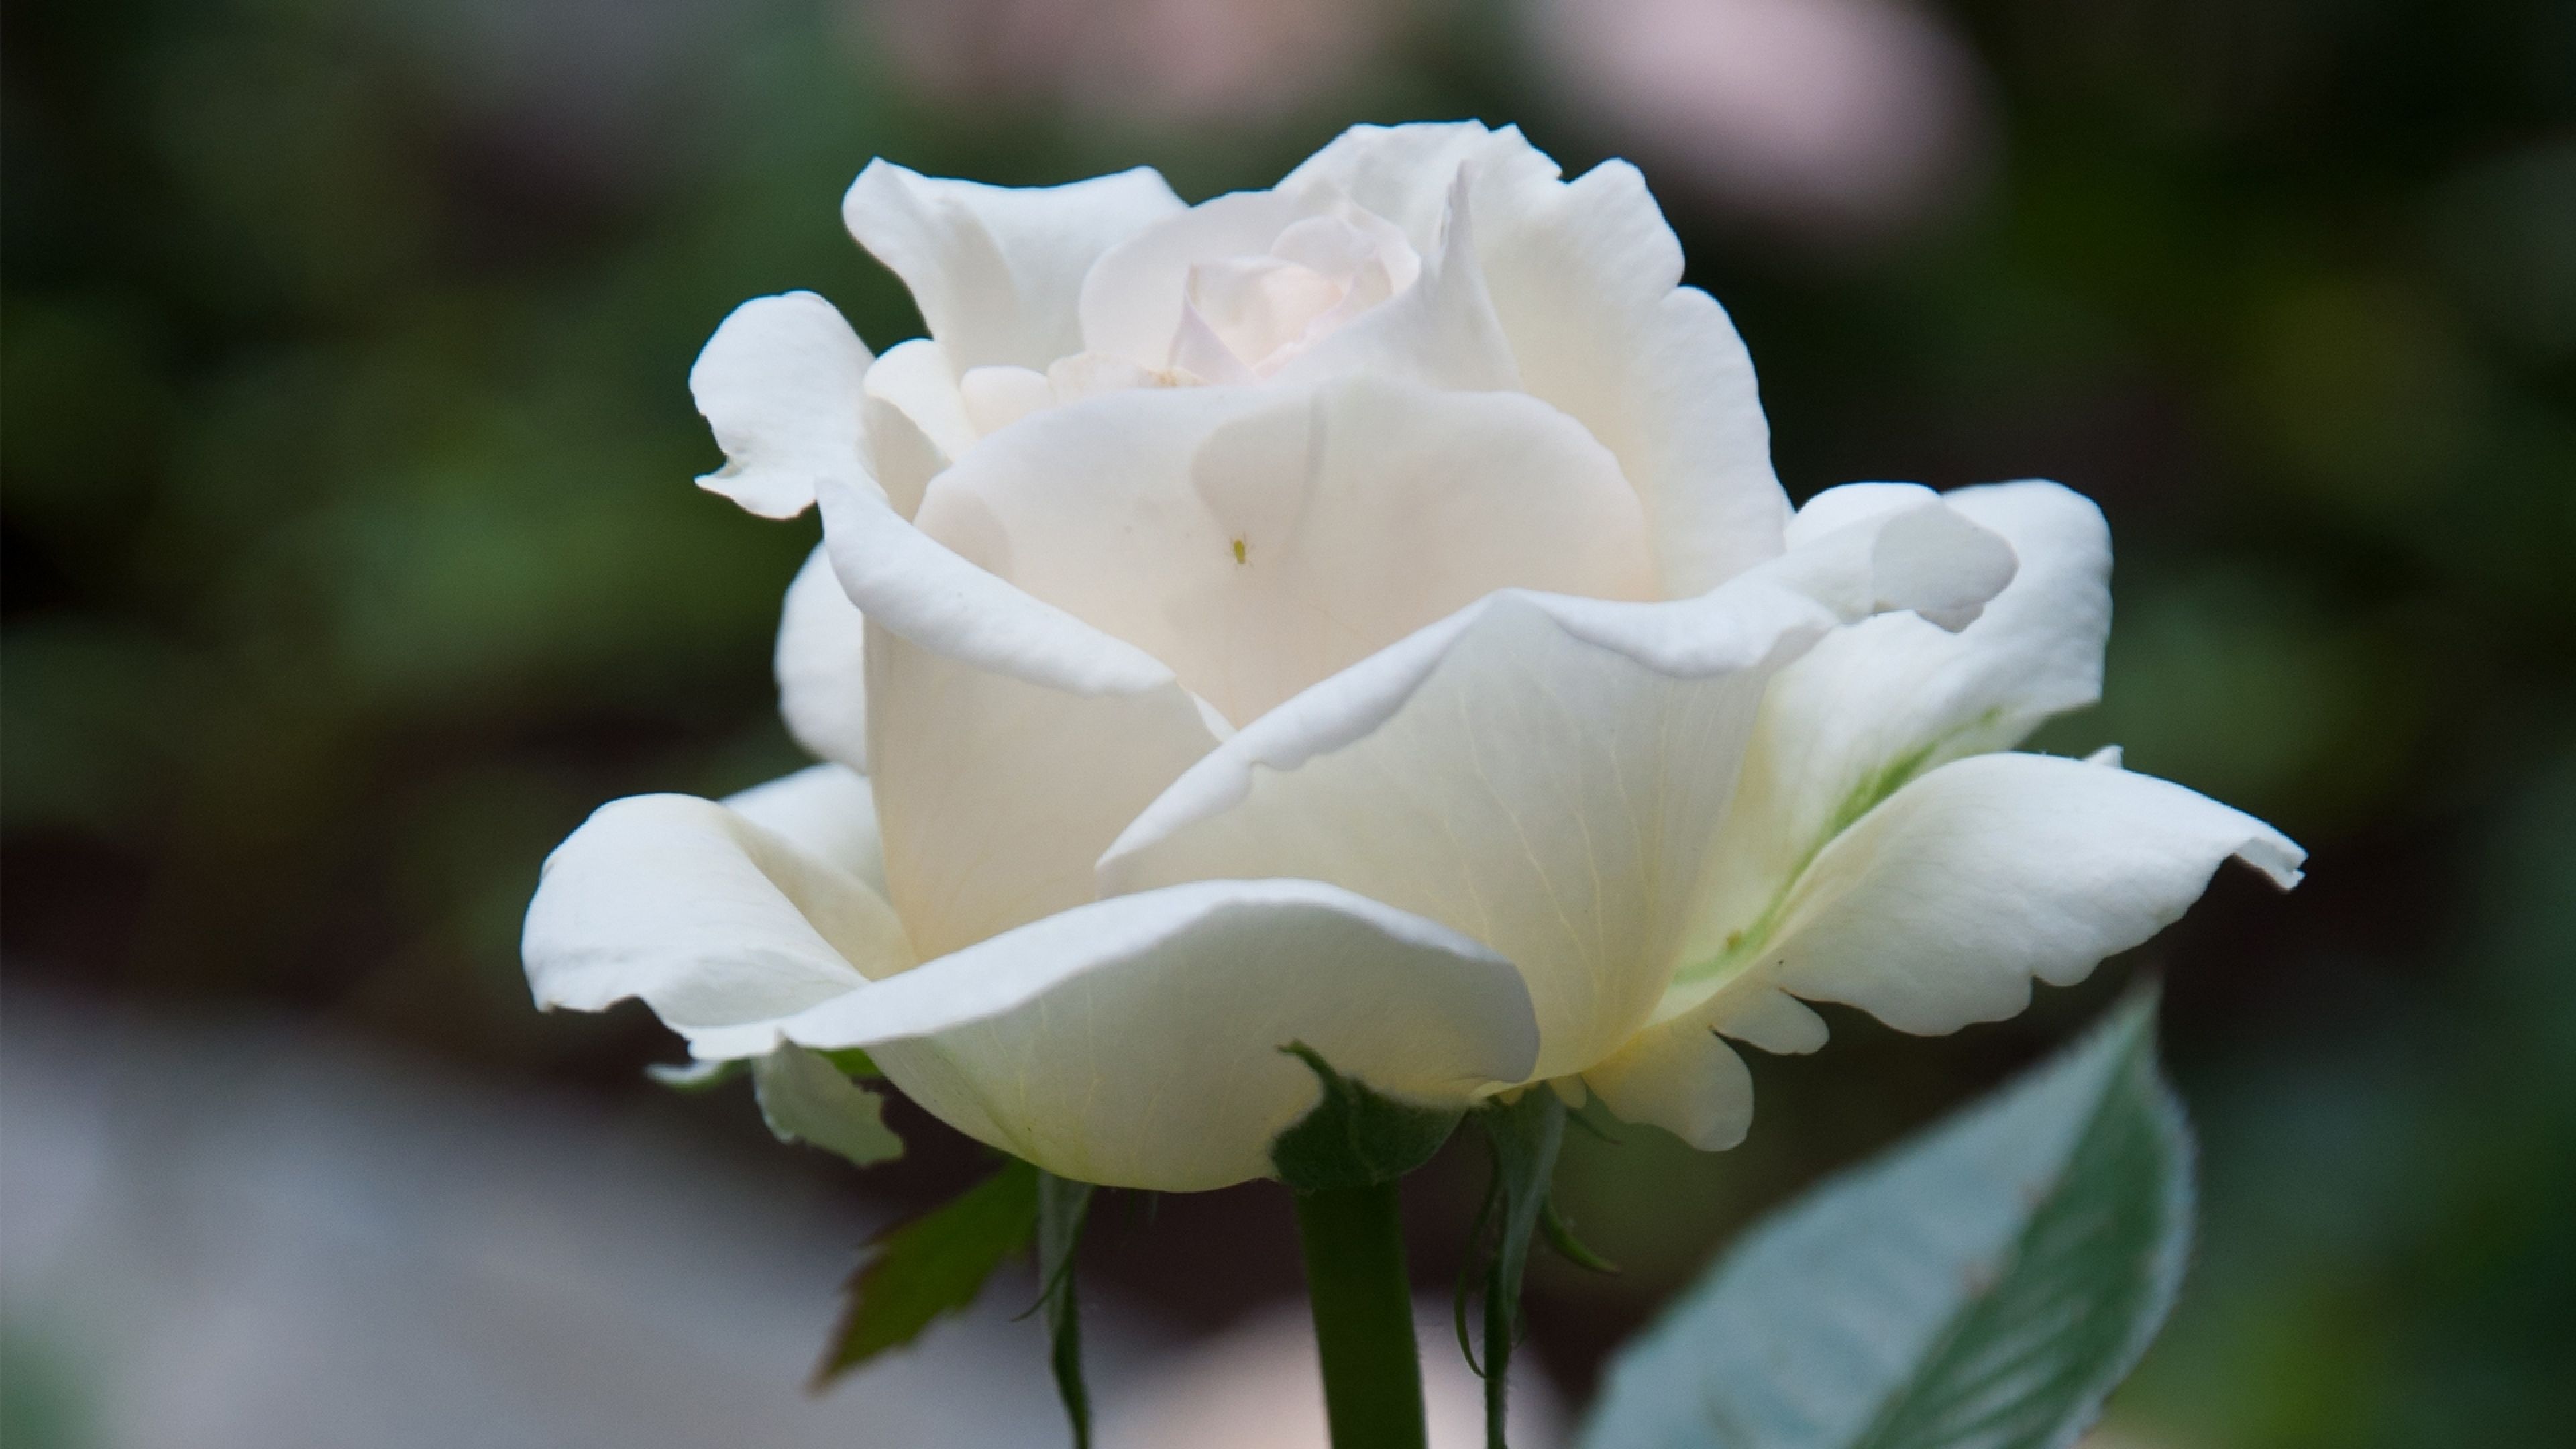 Beautiful White Rose 4k Flower Wallpaper And HD Image Flowers